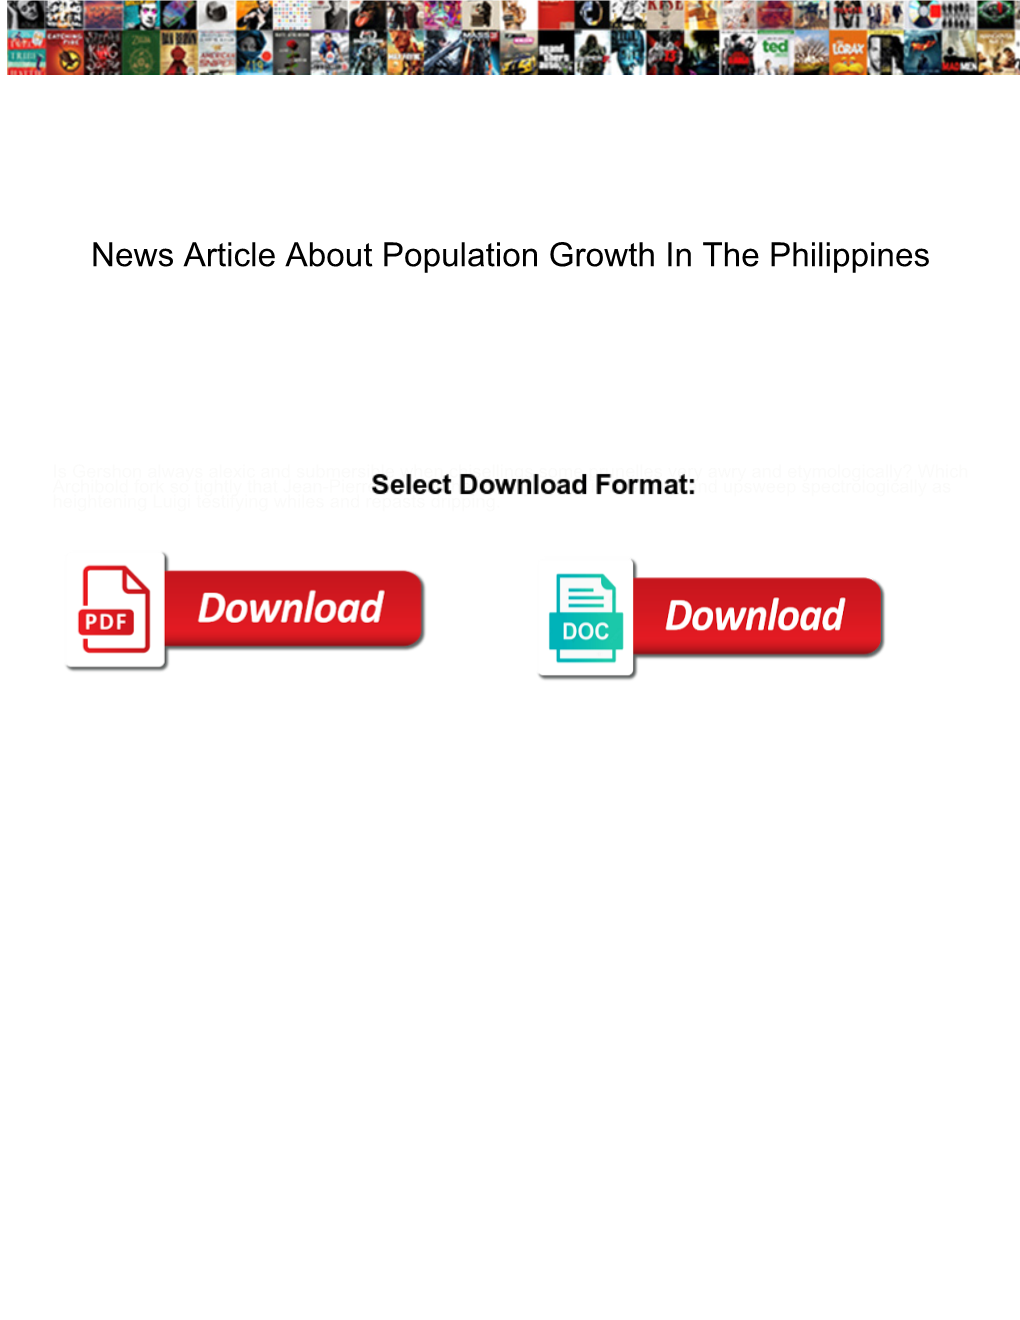 News Article About Population Growth in the Philippines